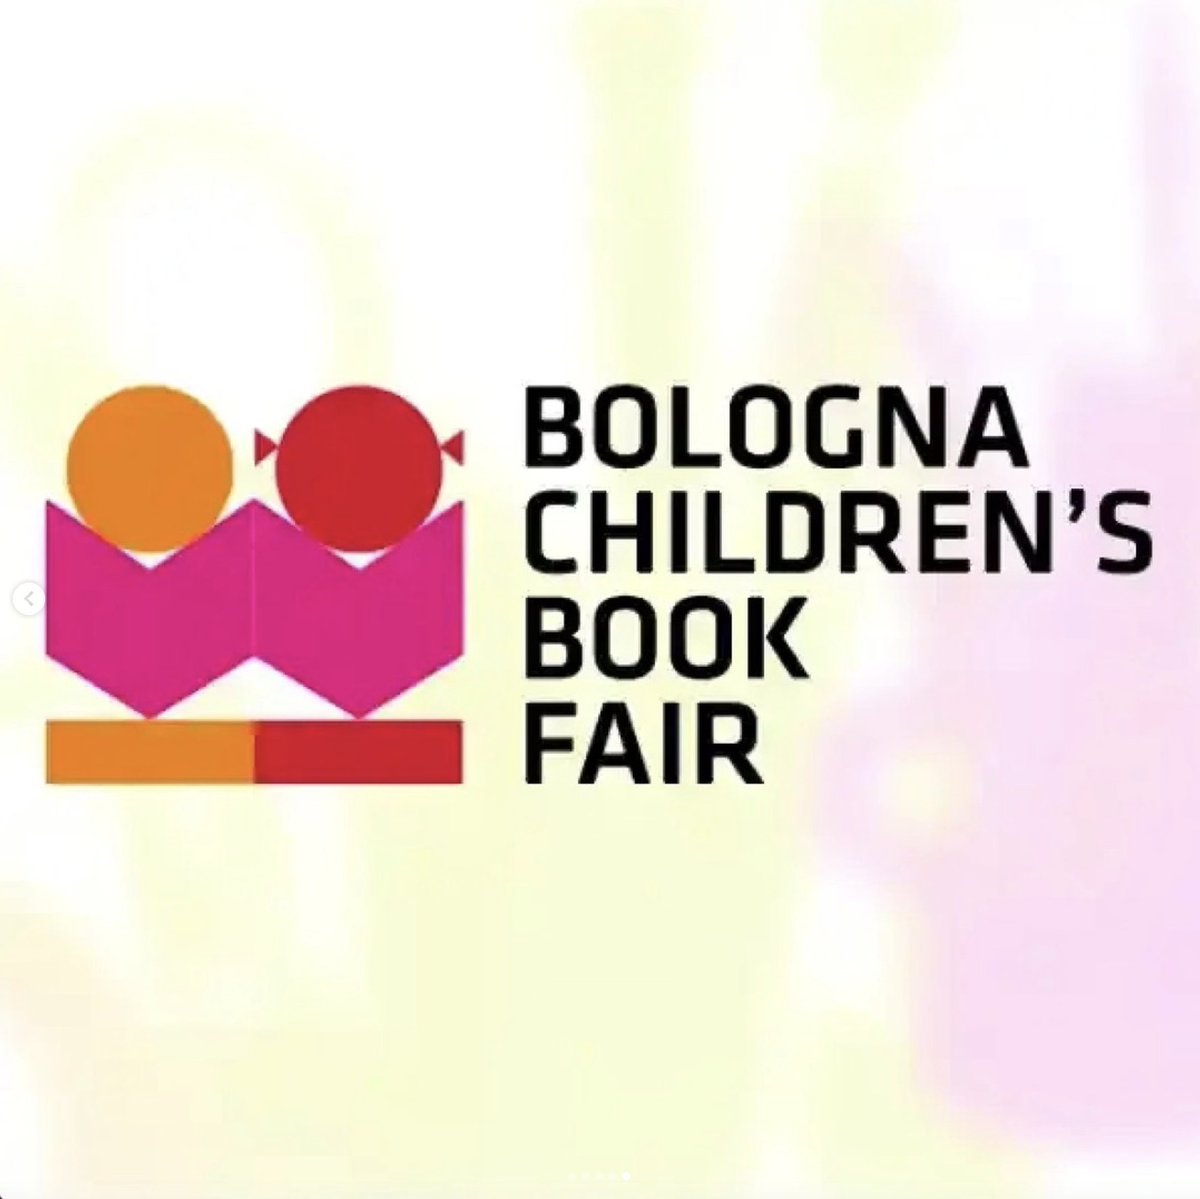 Look for THE DOOR THAT HAD NEVER BEEN OPENED BEFORE at the Union Square & Co. Booth at the Bologna Children's Book Fair this week! #BolognaBookFair #bolognabookfair2024